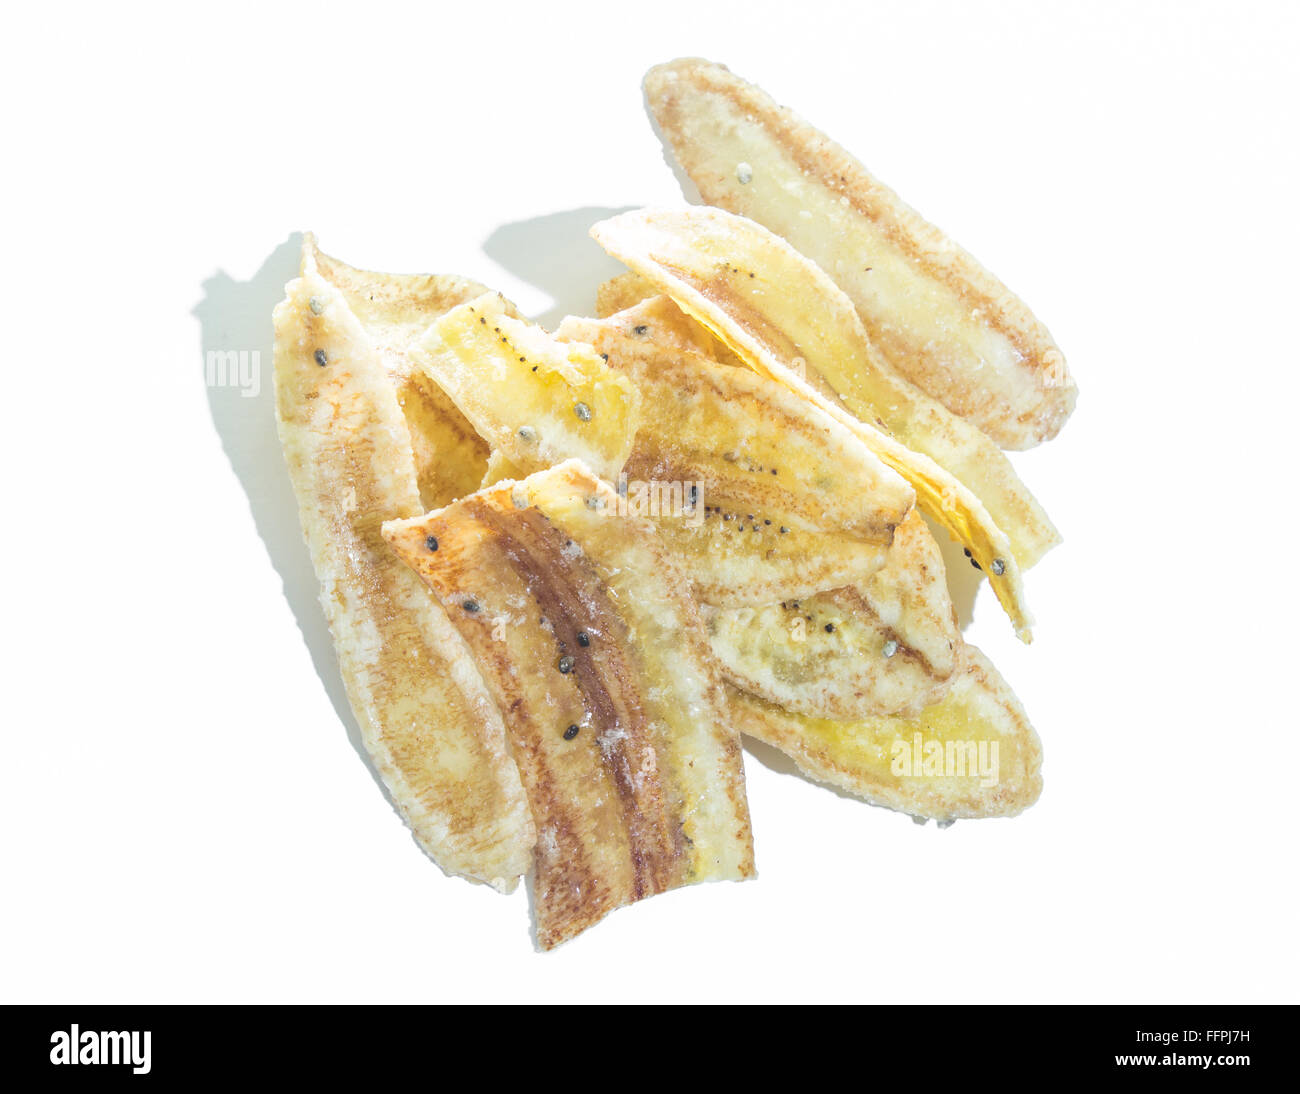 dried banana slices coated with sugar, Isolated Stock Photo